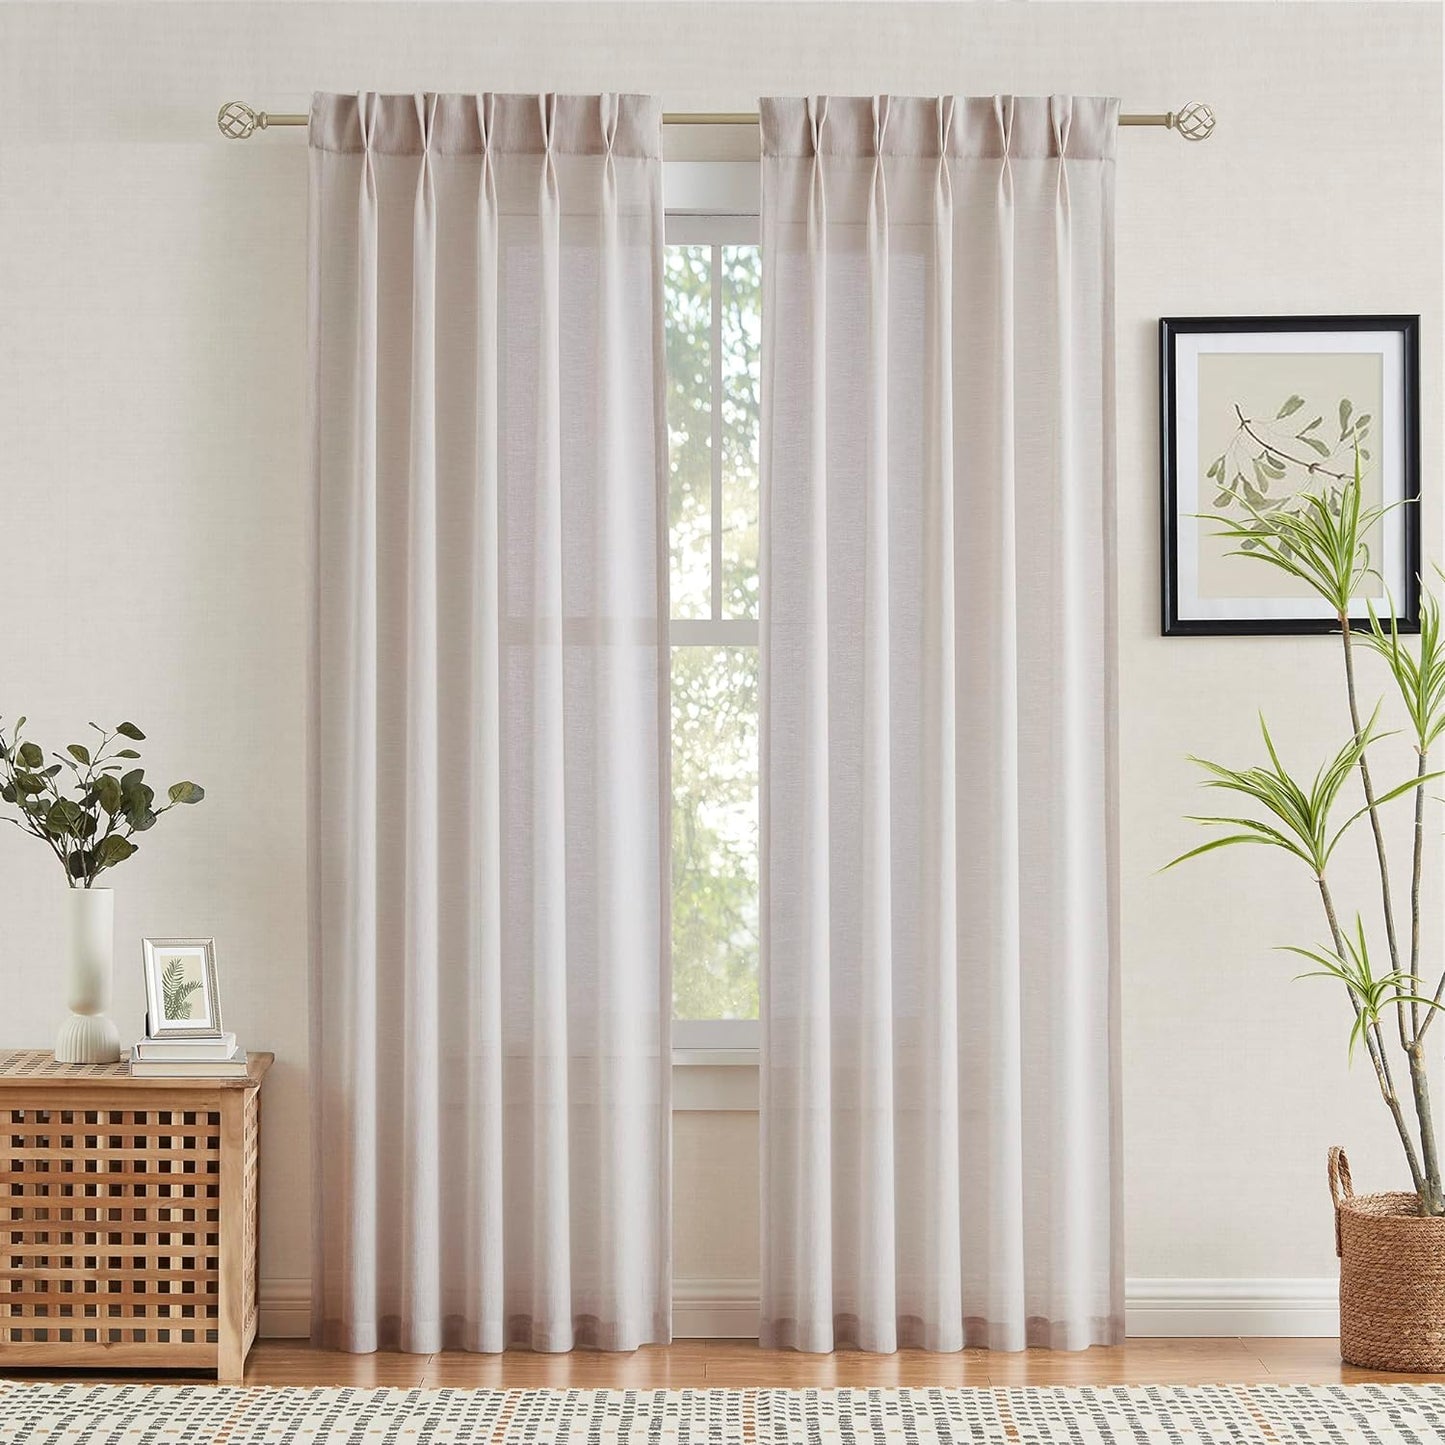 Enactex Linen Textured Pinch Pleat 25 X 84 Inch Semi Sheer Back Tab Curtains Light Filtering Drapes for Living Room Farmhouse Privacy Protect Window Treatments for Bedroom Patio Door 2 Panels, Tan  Enactex Natural 25"X95"X2 